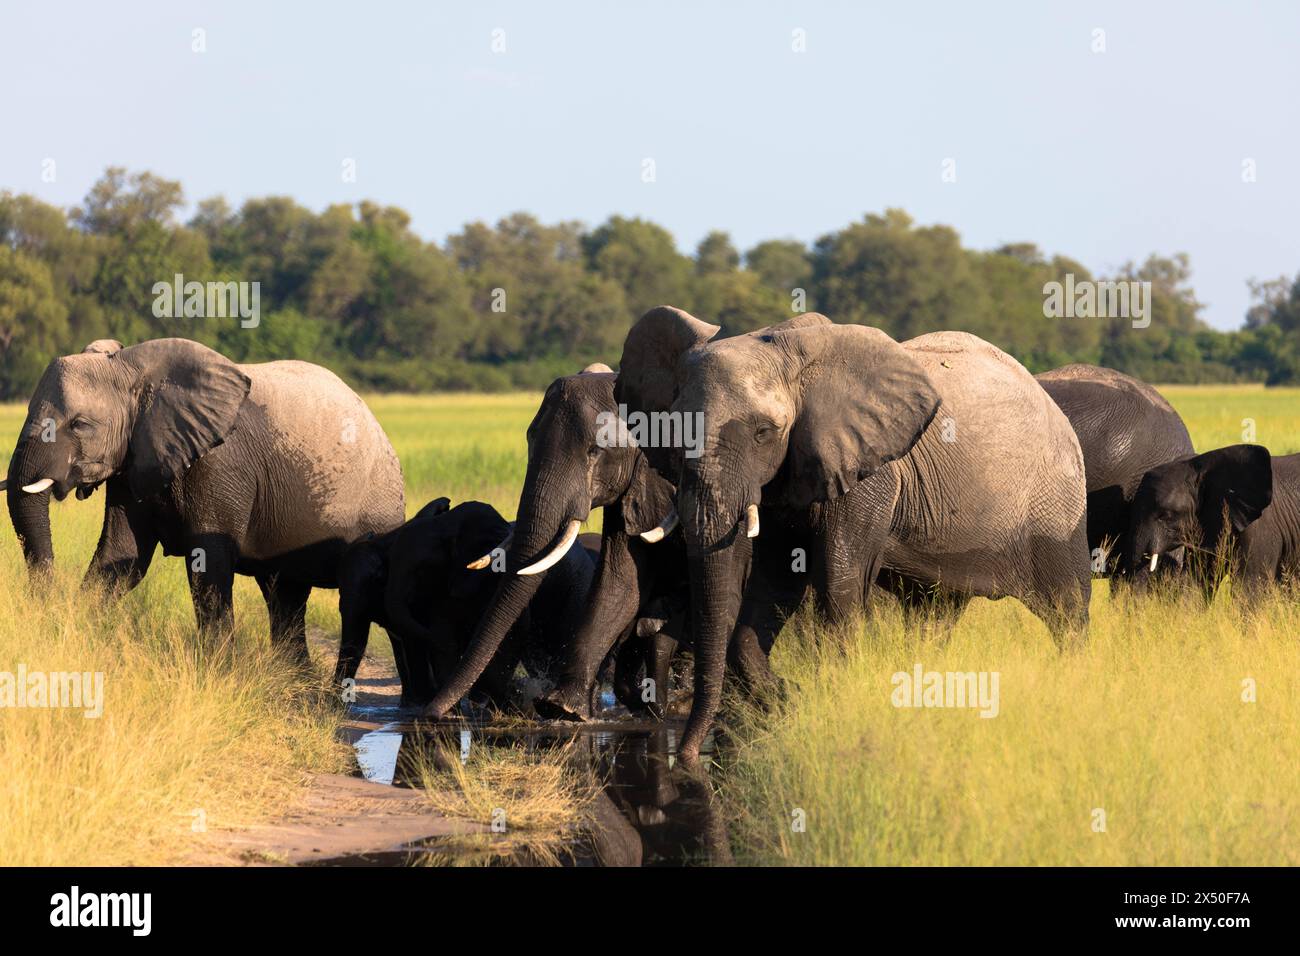 Herd of african elephants walks in the savanna looking for food surrounded by green vegetation during the rainy season. Chobe National Park, Botswana Stock Photo